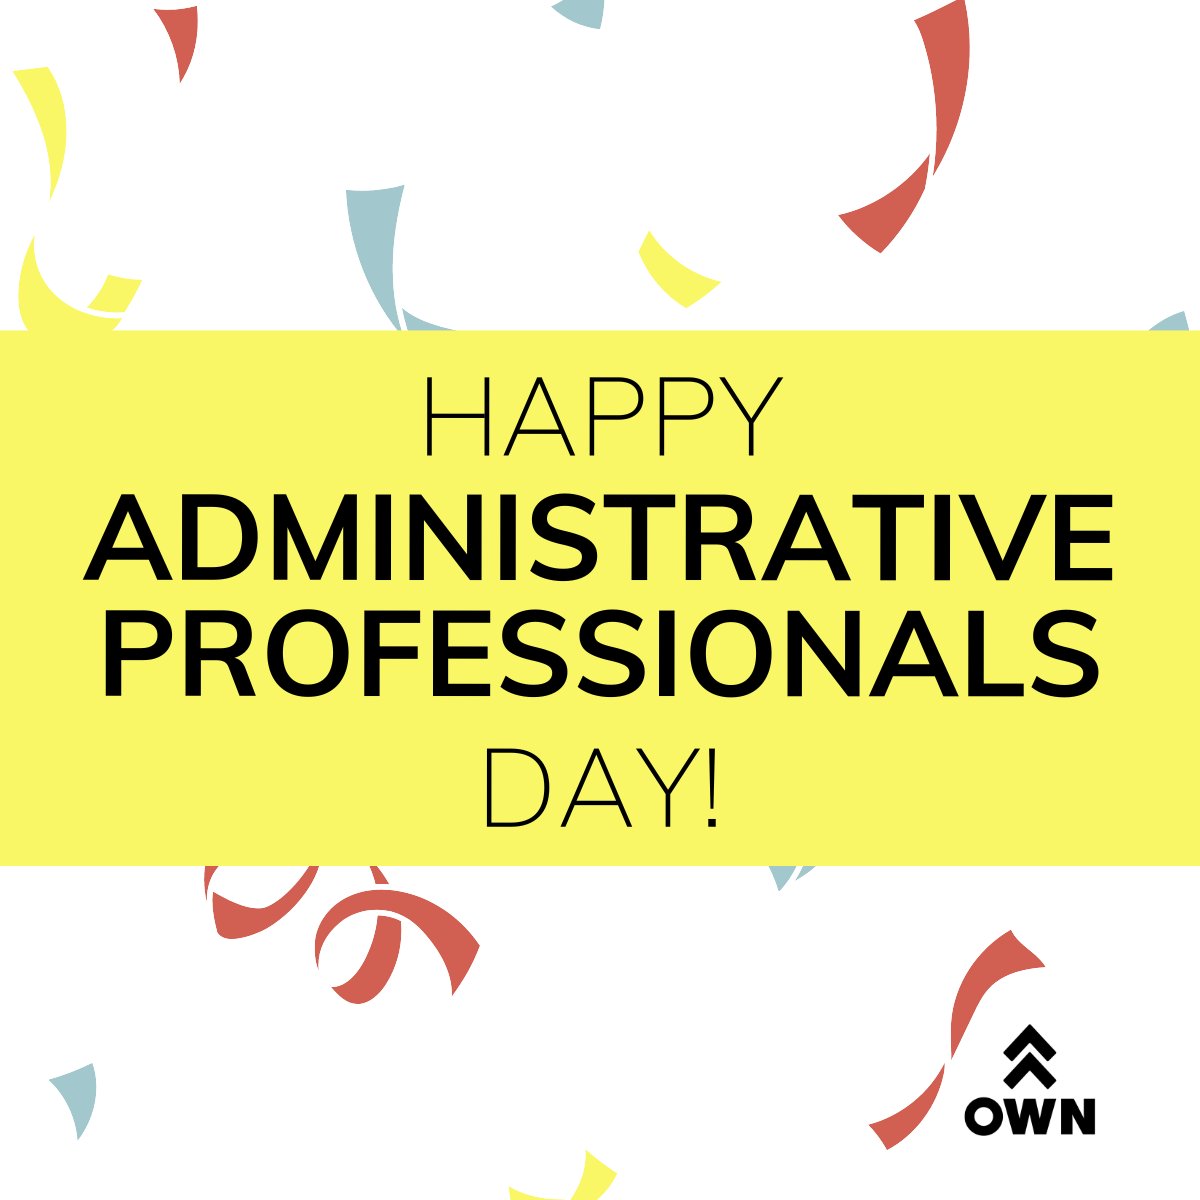 Today, we celebrate the incredible individuals who keep OWN running smoothly day in & day out—the backbone of our company, our administrative team! To all of our admins at OWN, your hard work & dedication, do not go unnoticed. You make OWN great. #AdministrativeProfessionalsDay